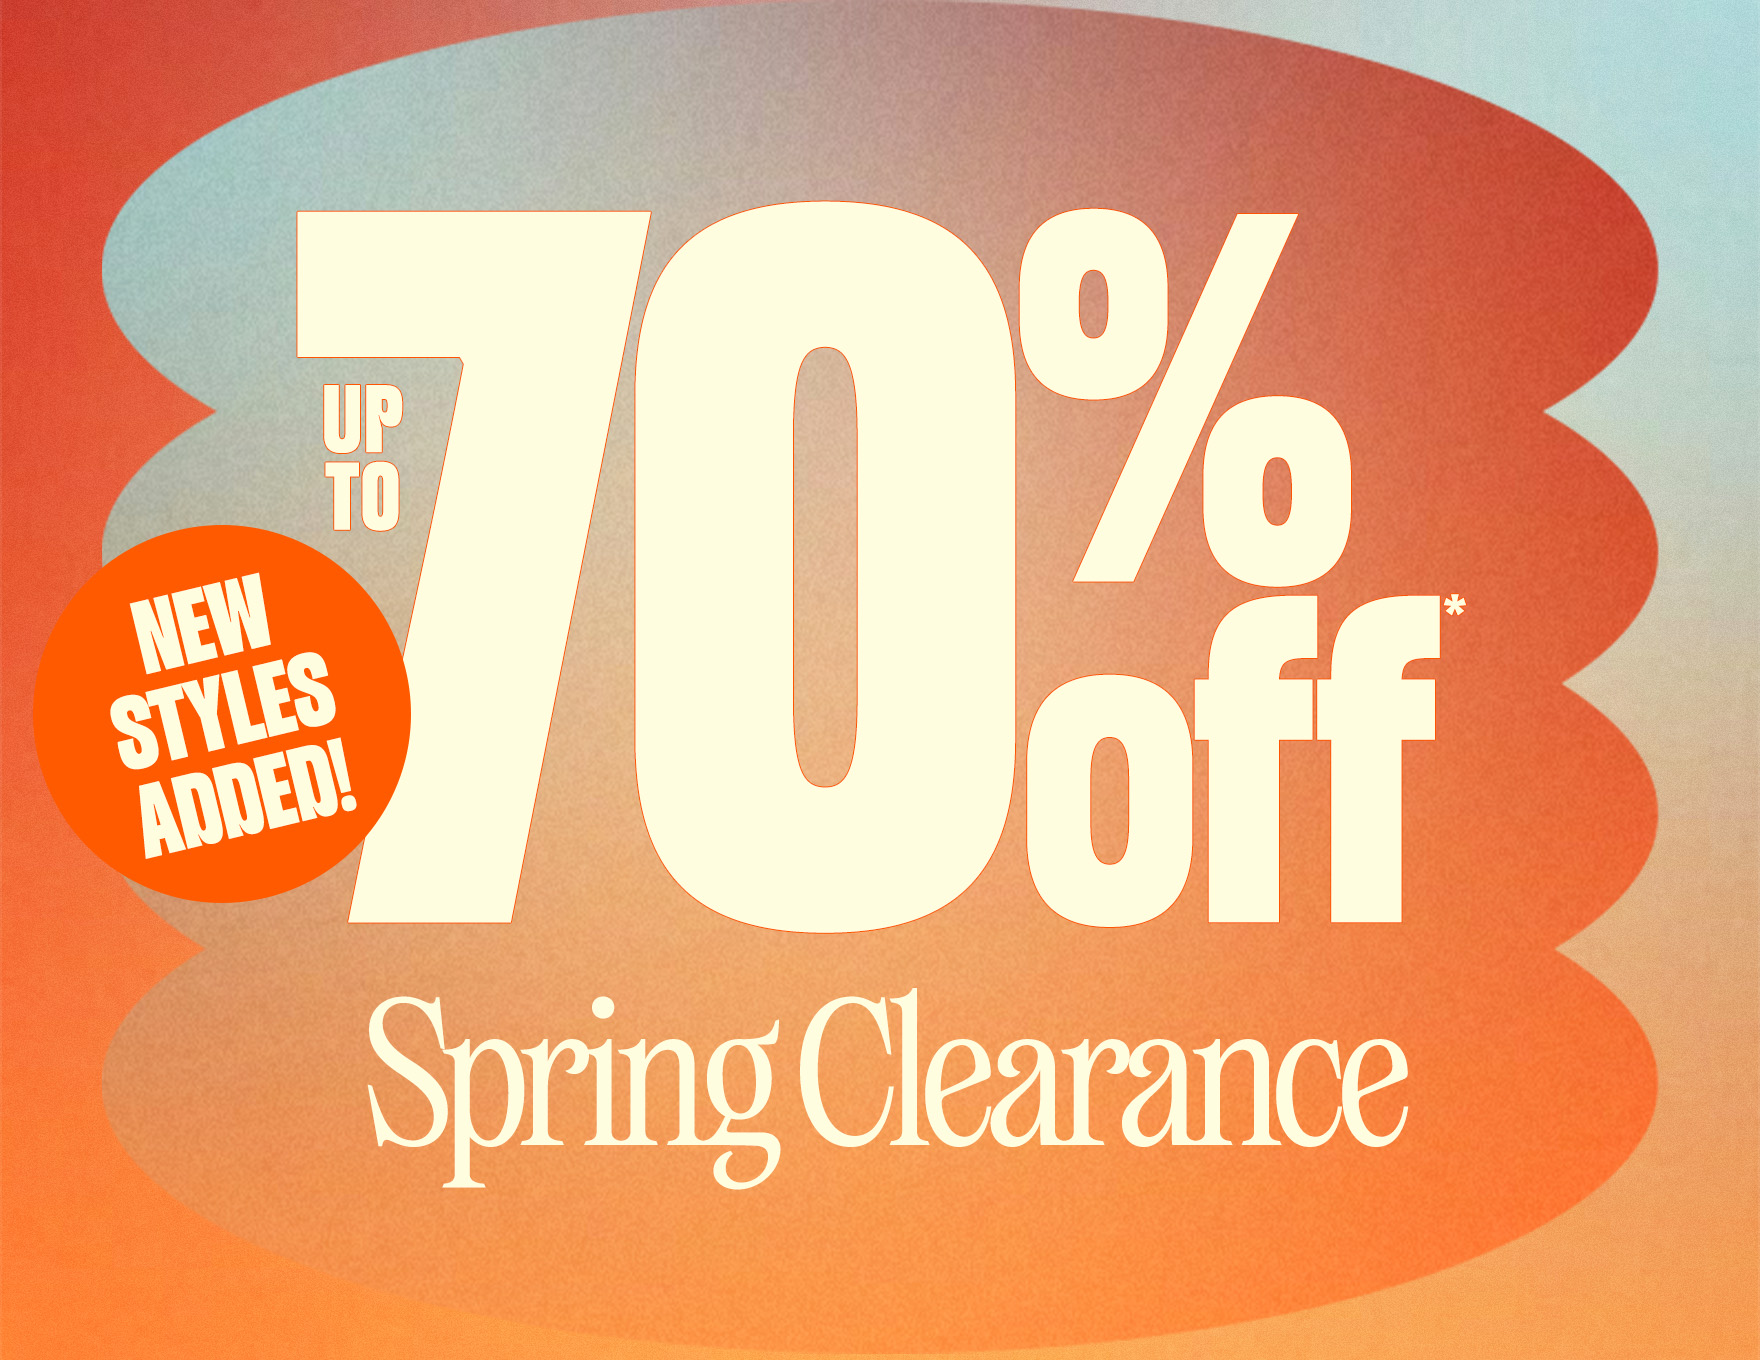 Up To 70% Off* Spring Clearance